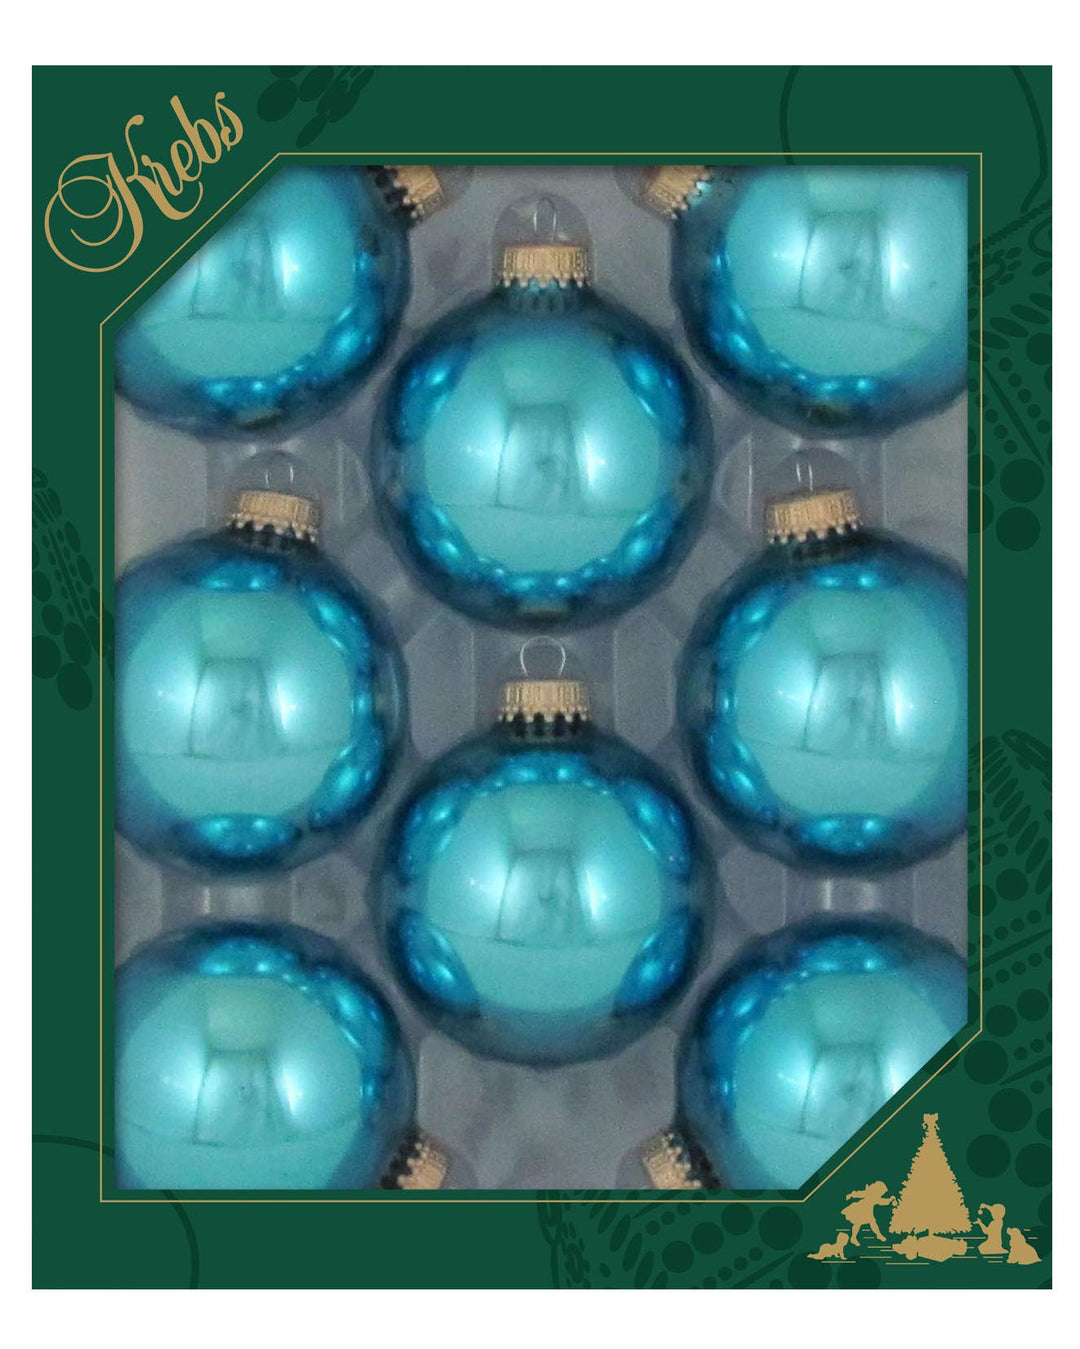 Christmas Tree Ornaments - 67mm / 2.625" [8 Pieces] Designer Glass Baubles from Christmas By Krebs - Handcrafted Seamless Hanging Holiday Decor for Trees (Shiny Pale Turquoise)